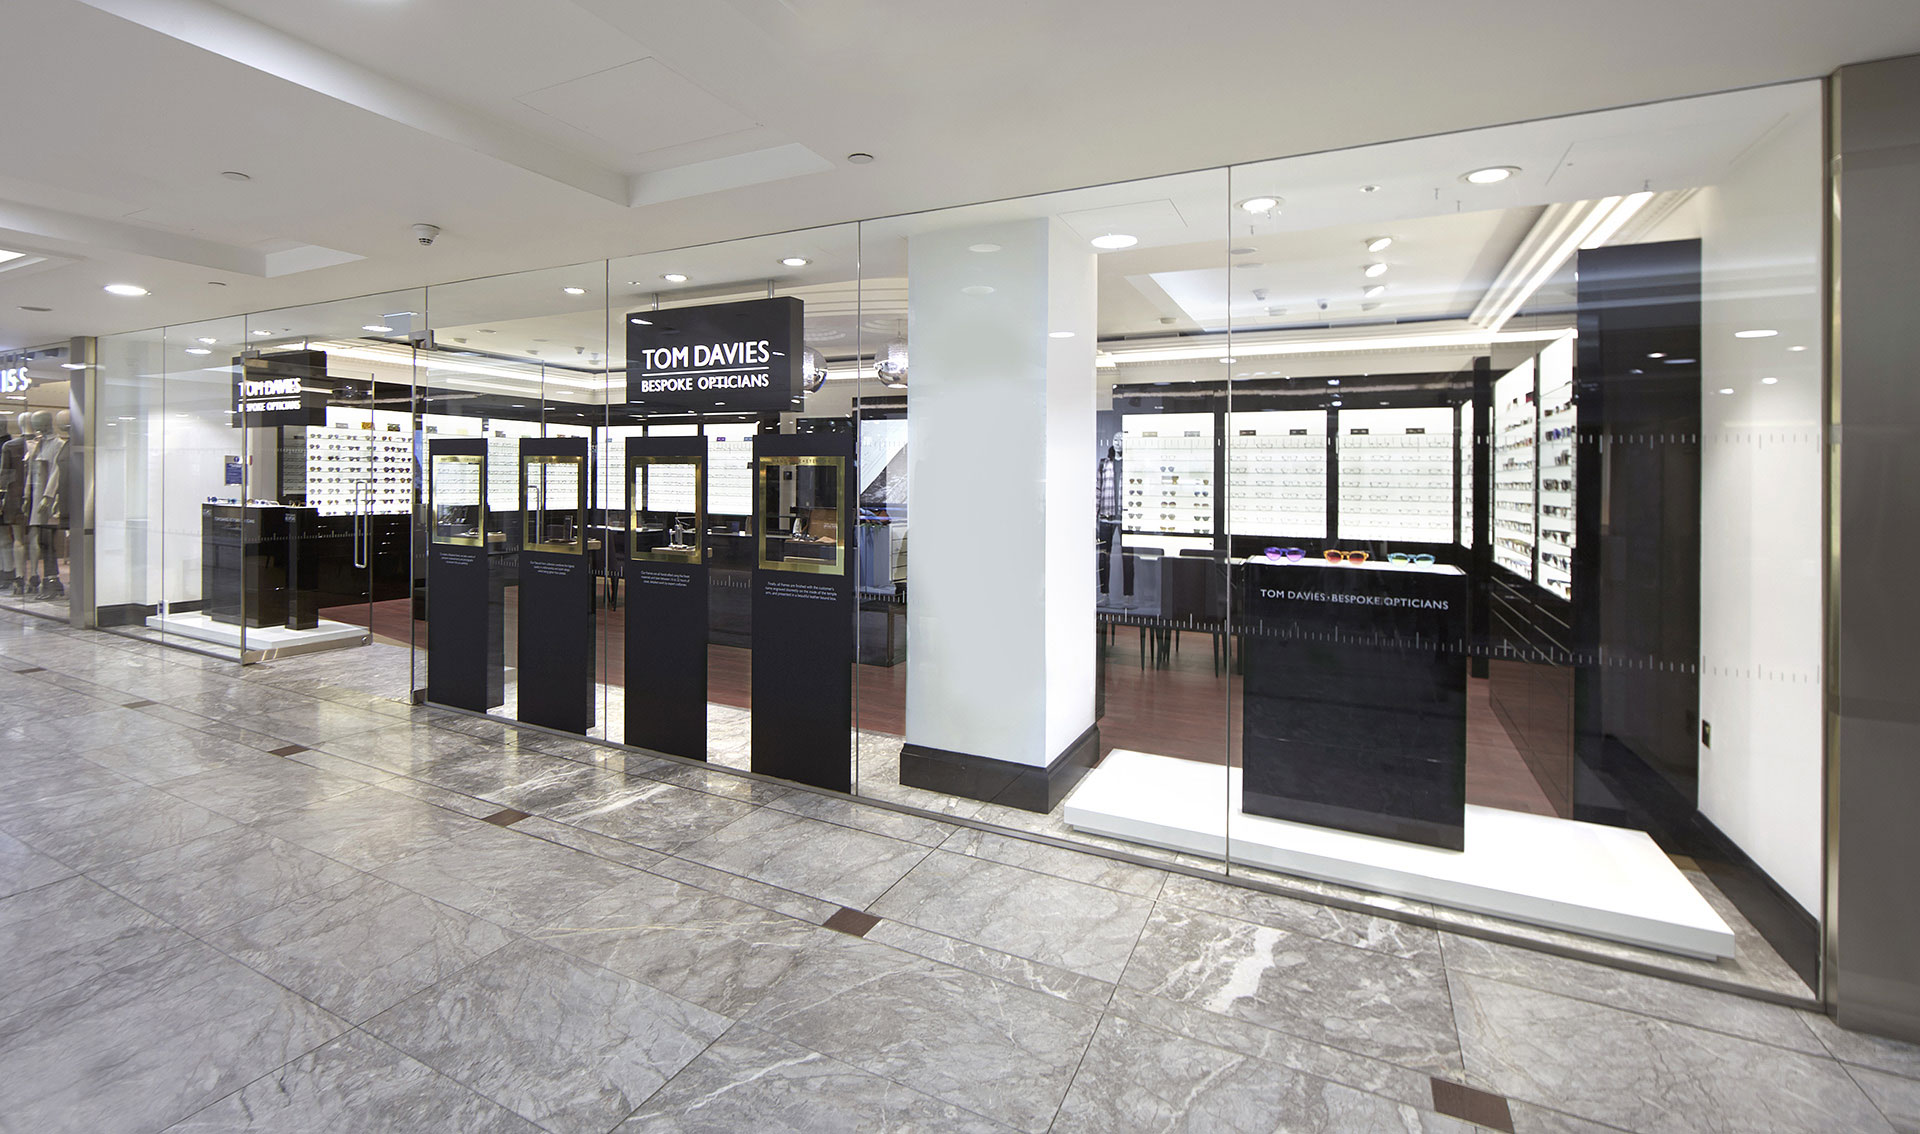 Store front of Tom Davies Bespoke Opticians in Canary Wharf, London